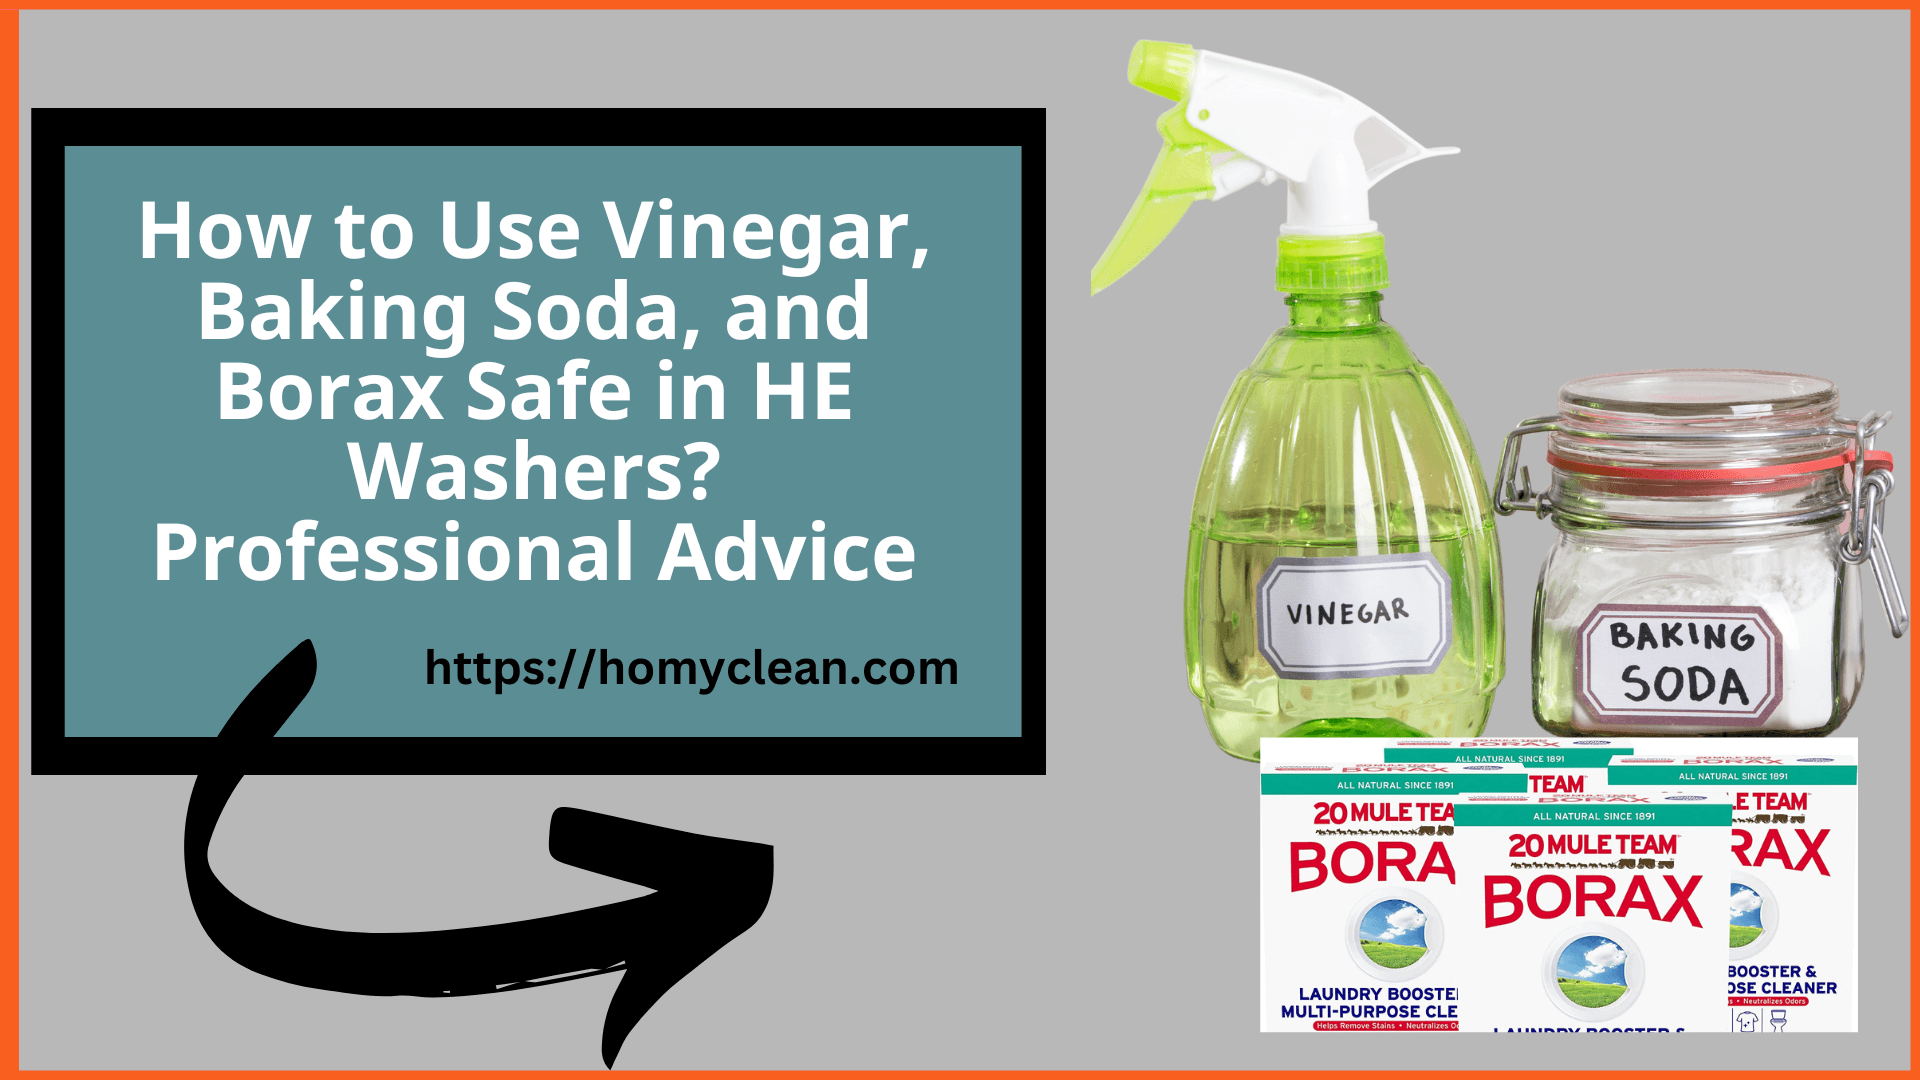 How to Use Vinegar Baking Soda and Borax Safe in HE Washers? Professional Advice